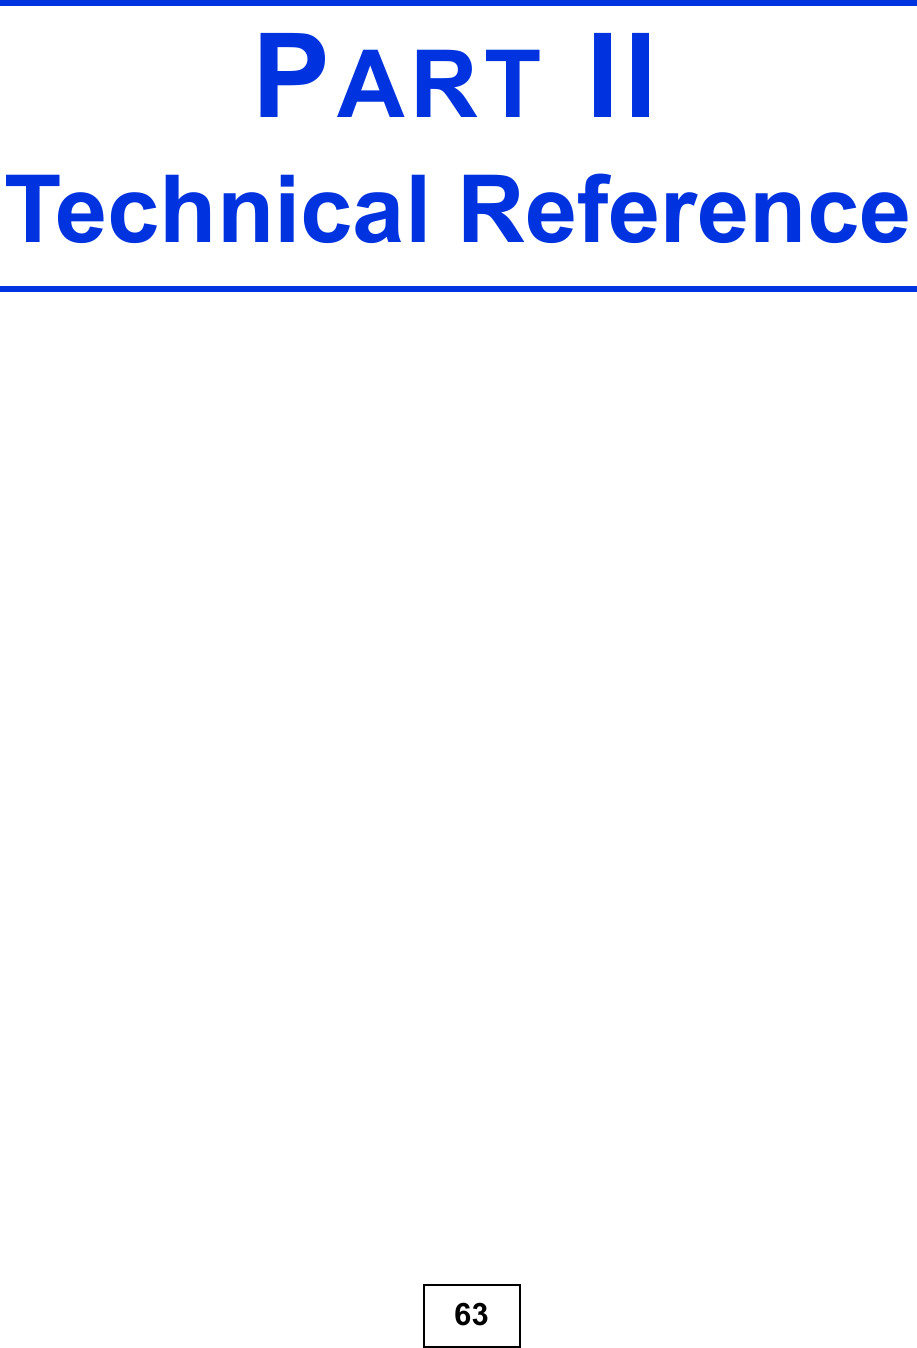 63PART IITechnical Reference